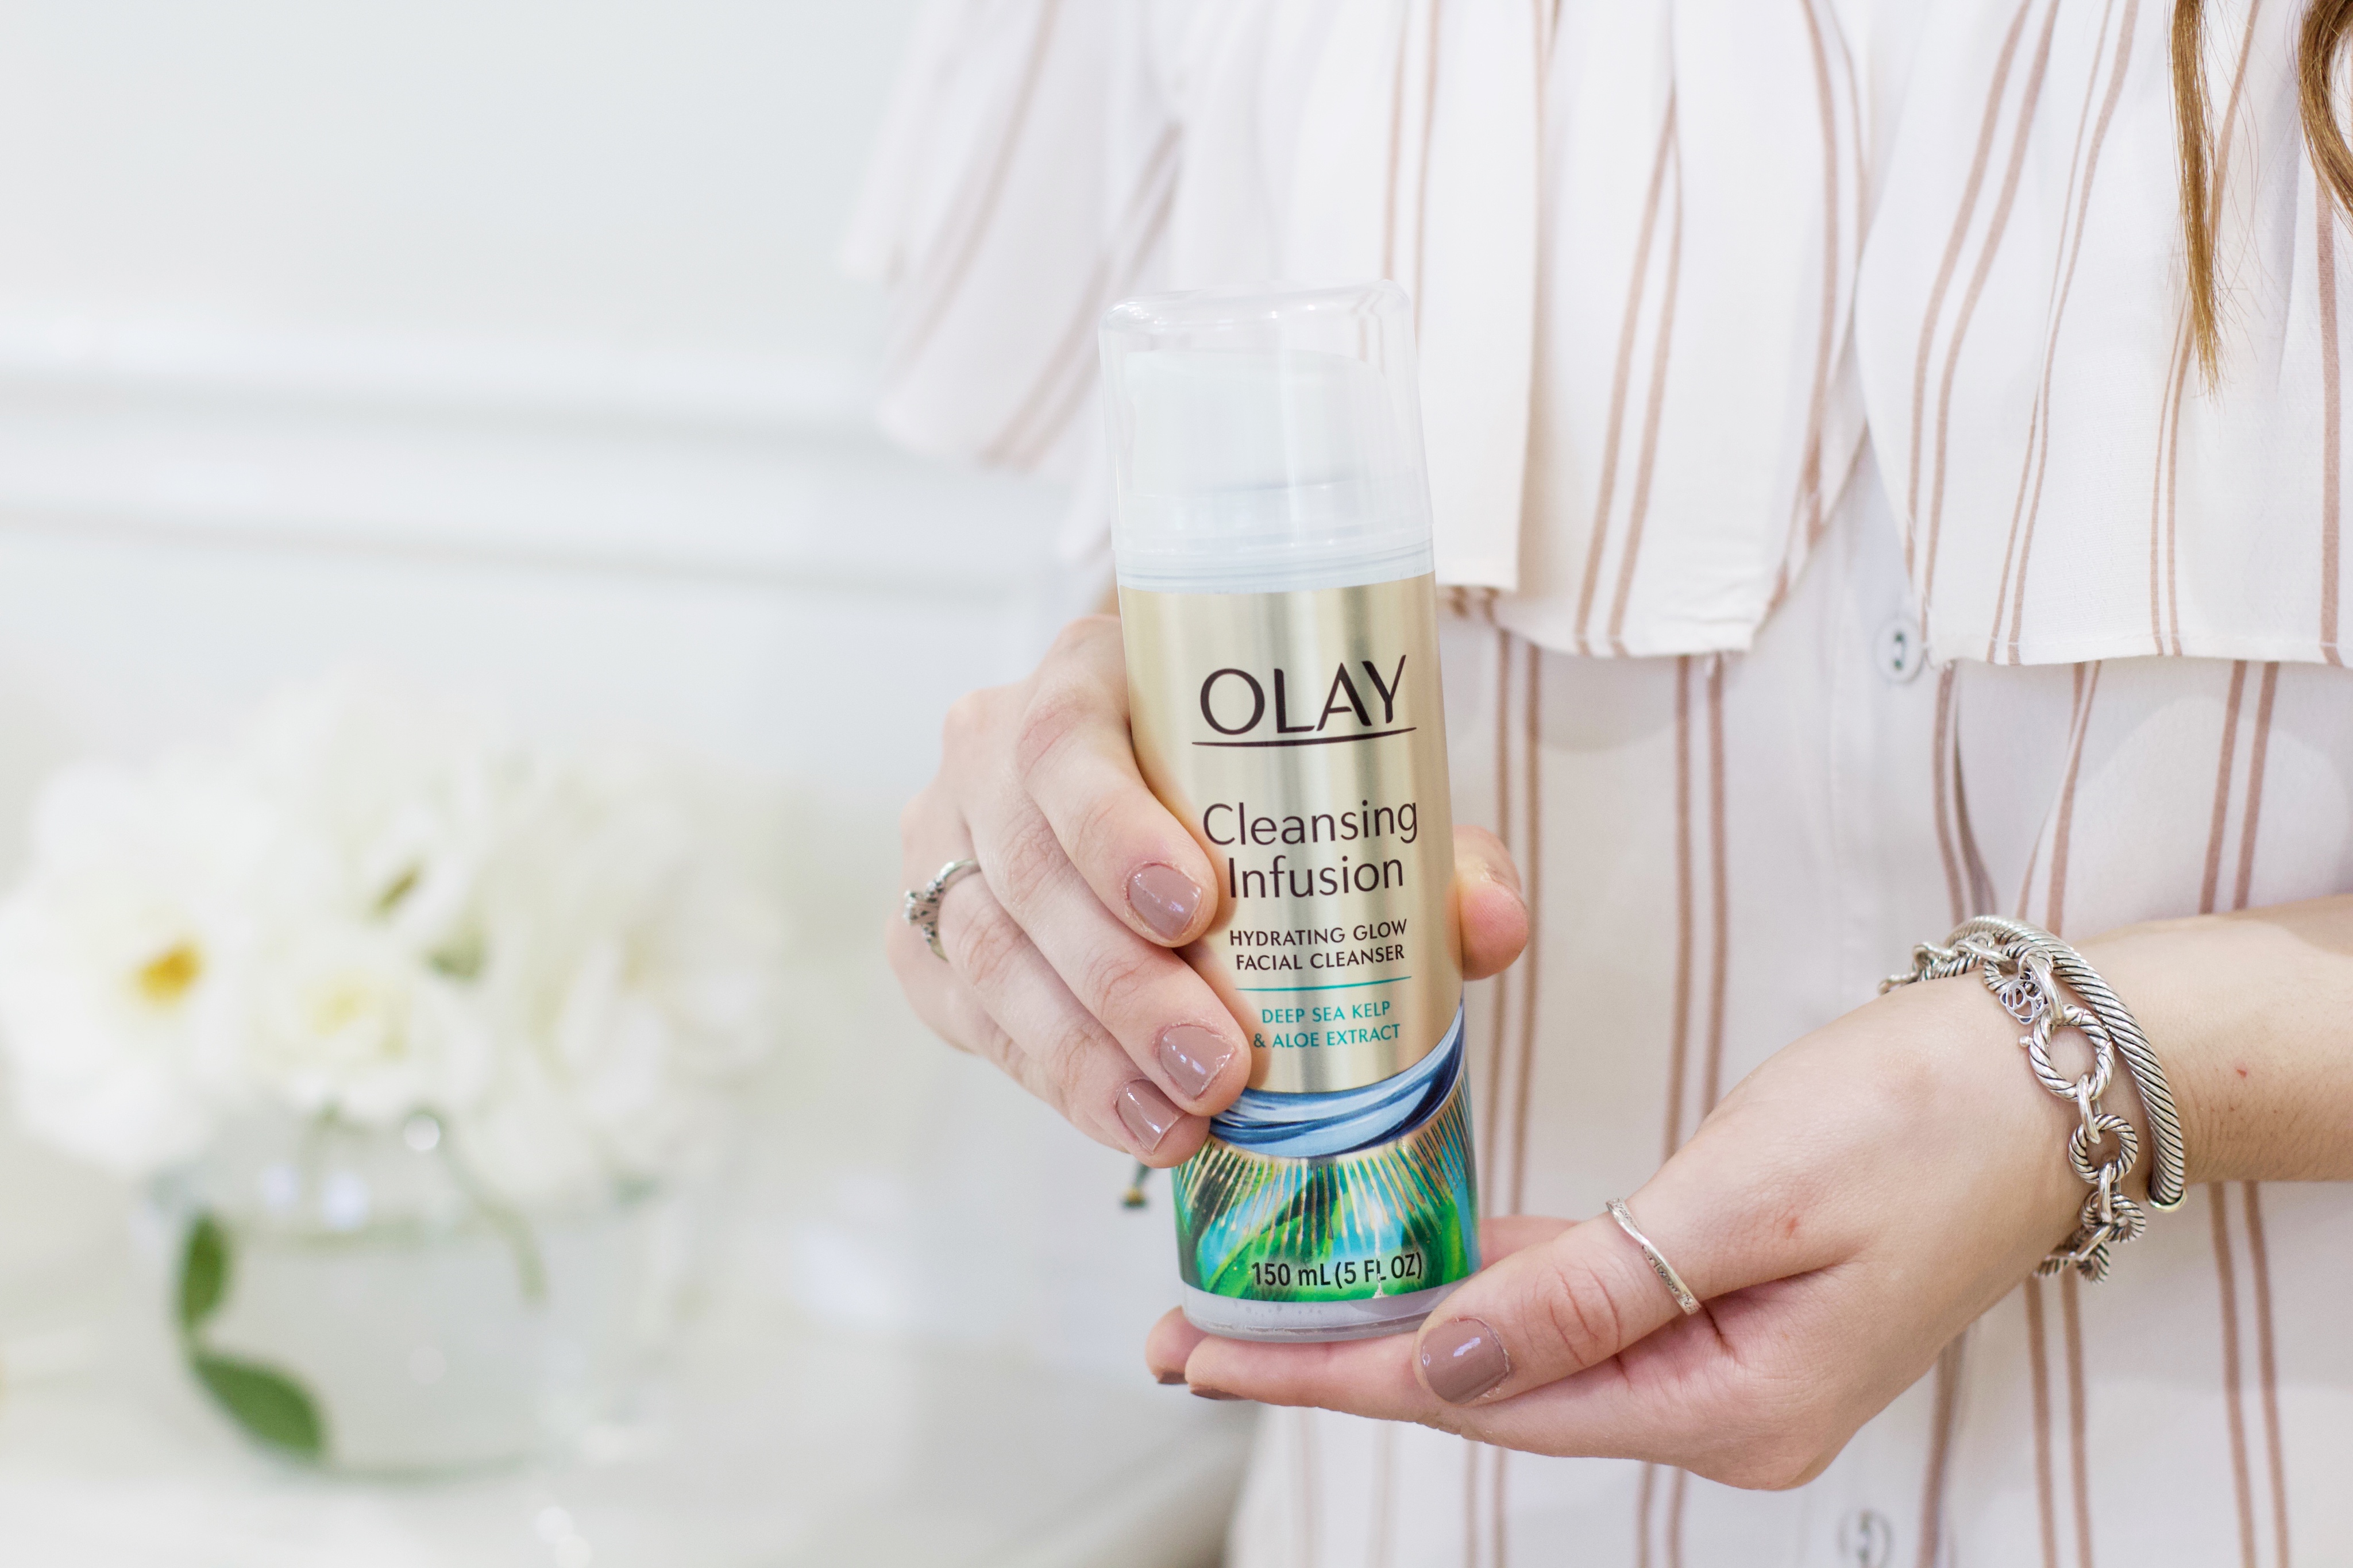 olay cleansing infusion facial cleanser reviews